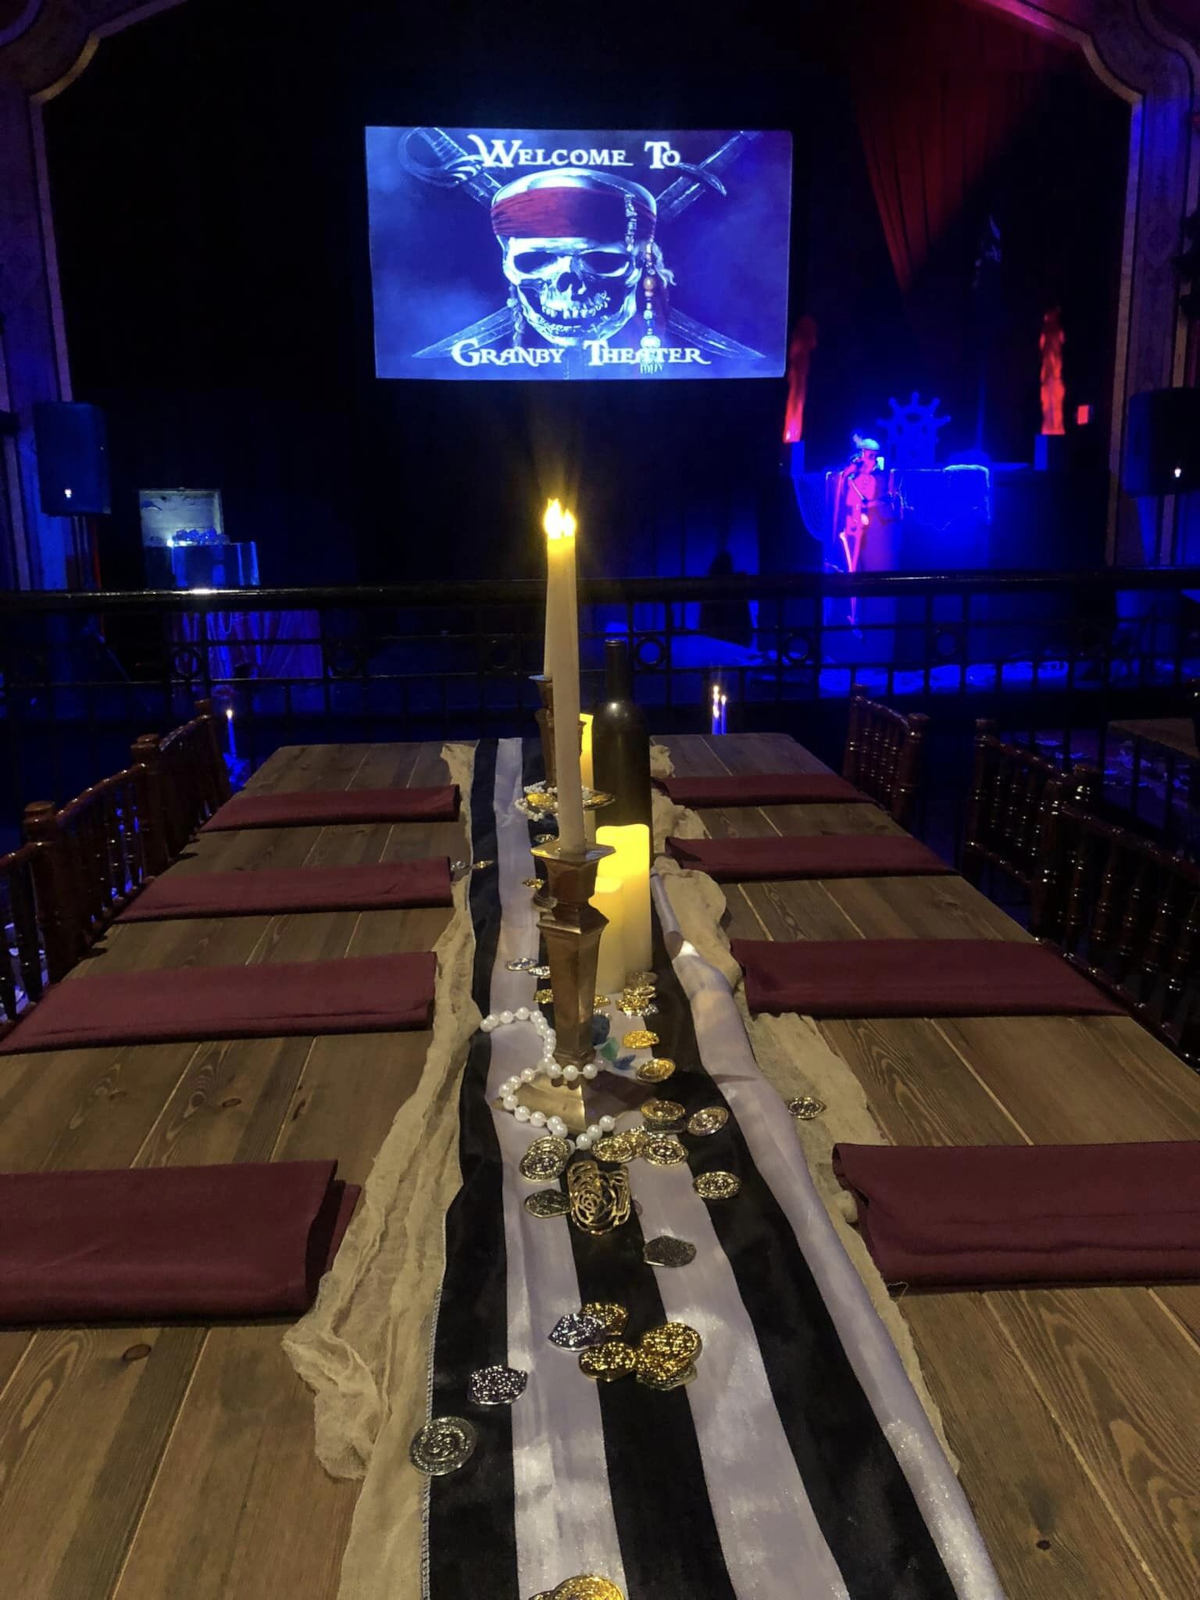 A long decorated table setting for Pirates of the Caribbean themed event